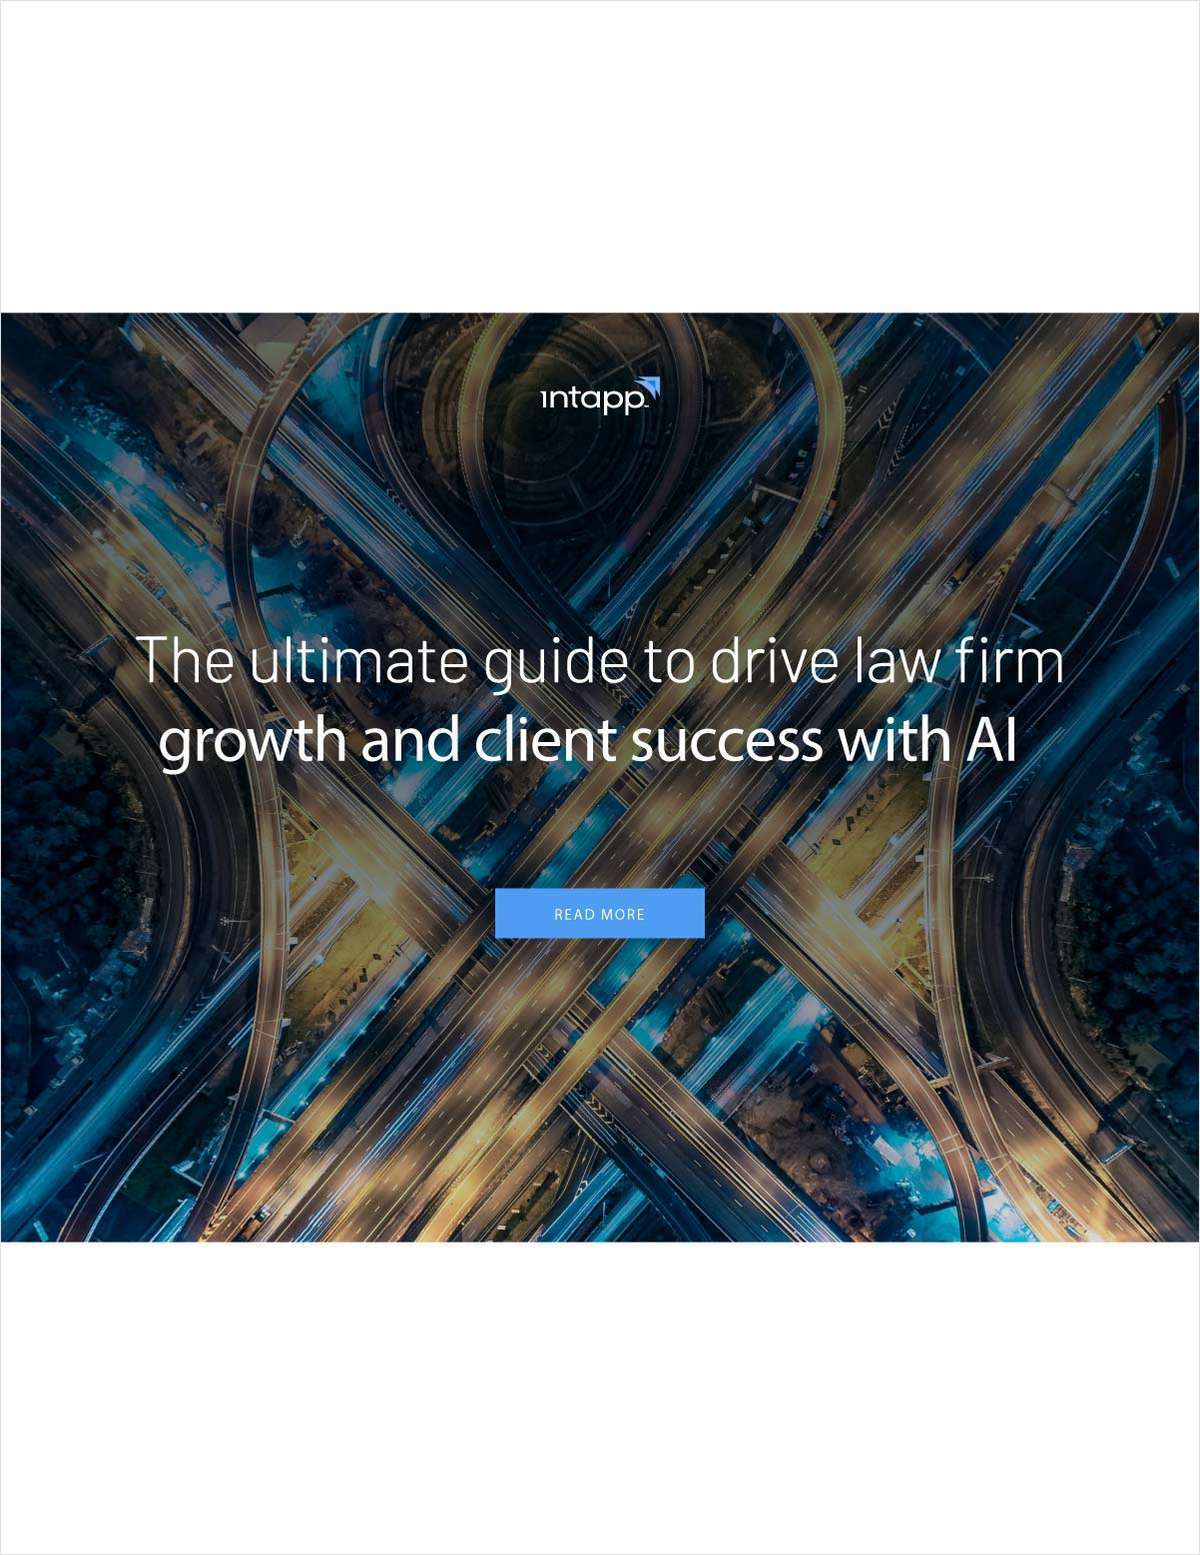 The Ultimate Guide to Drive Law Firm Growth and Client Success with AI